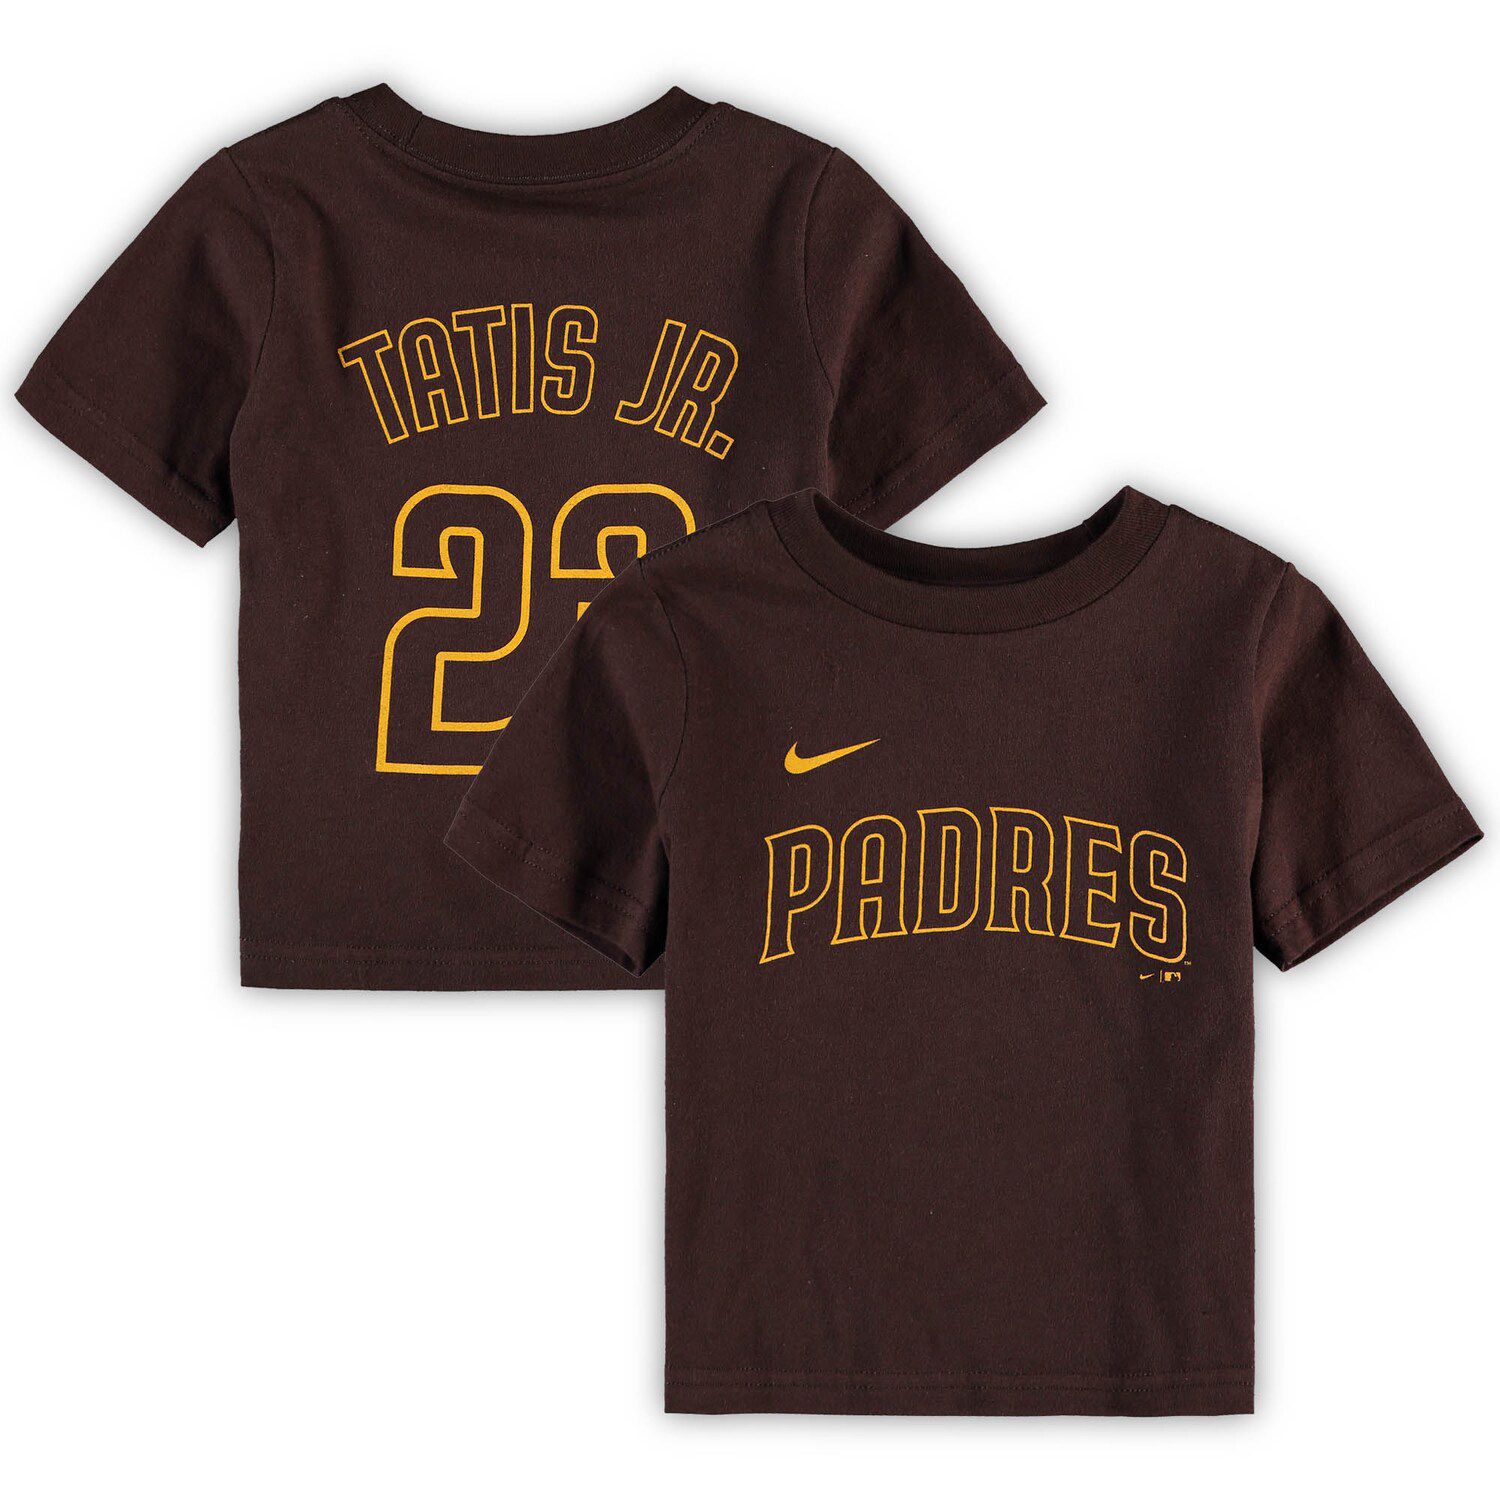 San Diego Padres Baby Clothes